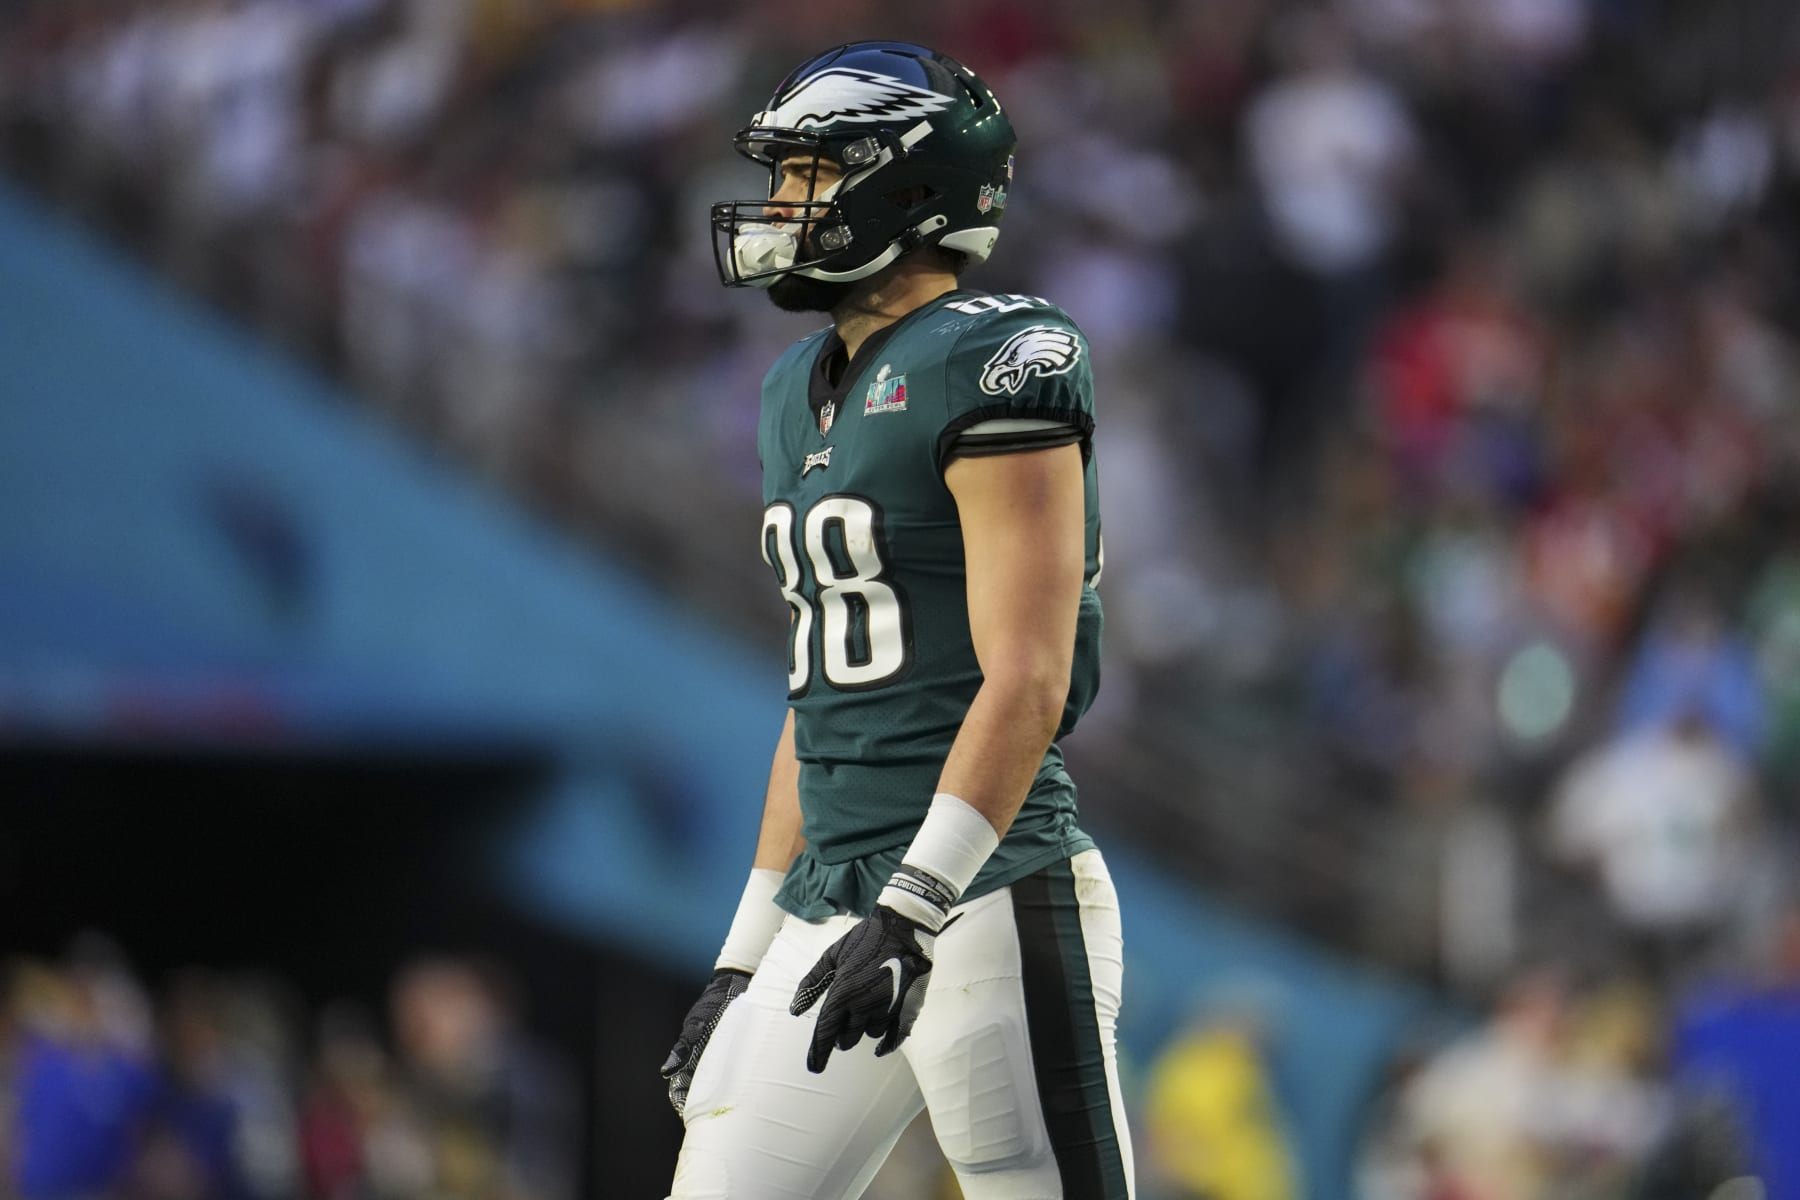 Washington Commanders vs. Philadelphia Eagles Start 'Em, Sit 'Em: Players  To Target Include Terry McLaurin, Kenneth Gainwell, Dallas Goedert, and  Others